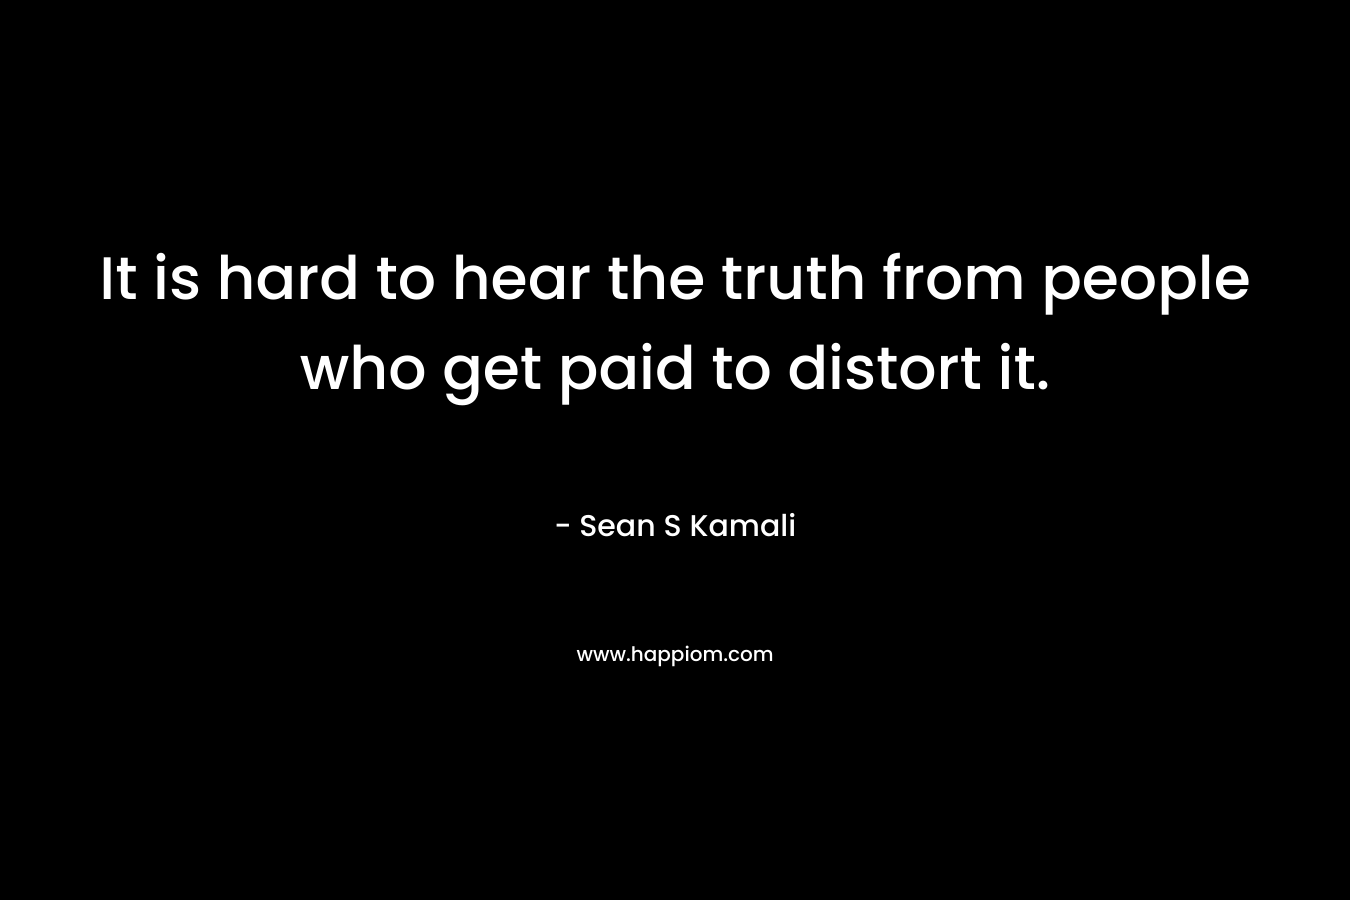 It is hard to hear the truth from people who get paid to distort it. – Sean S Kamali